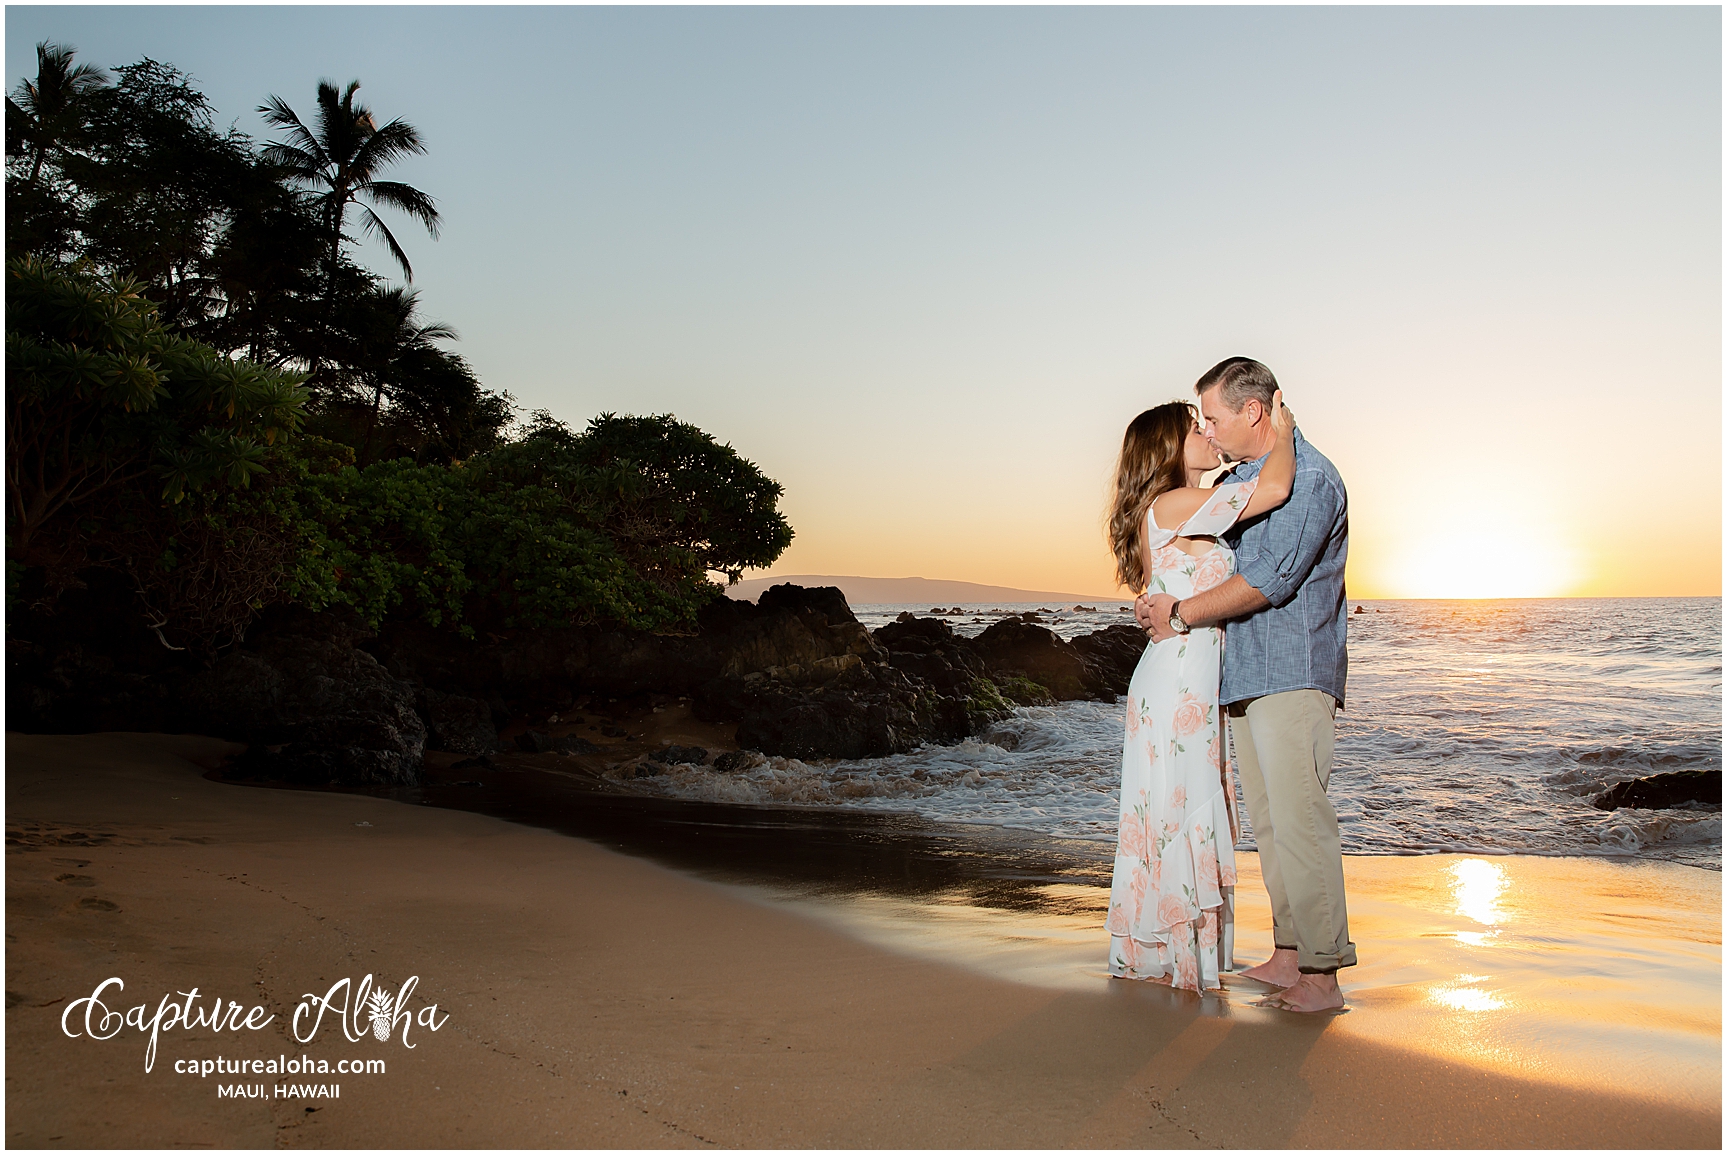 Maui Couples Photography at Mokapu Beach, Maui at sunset with couple kissing and palm trees in the background